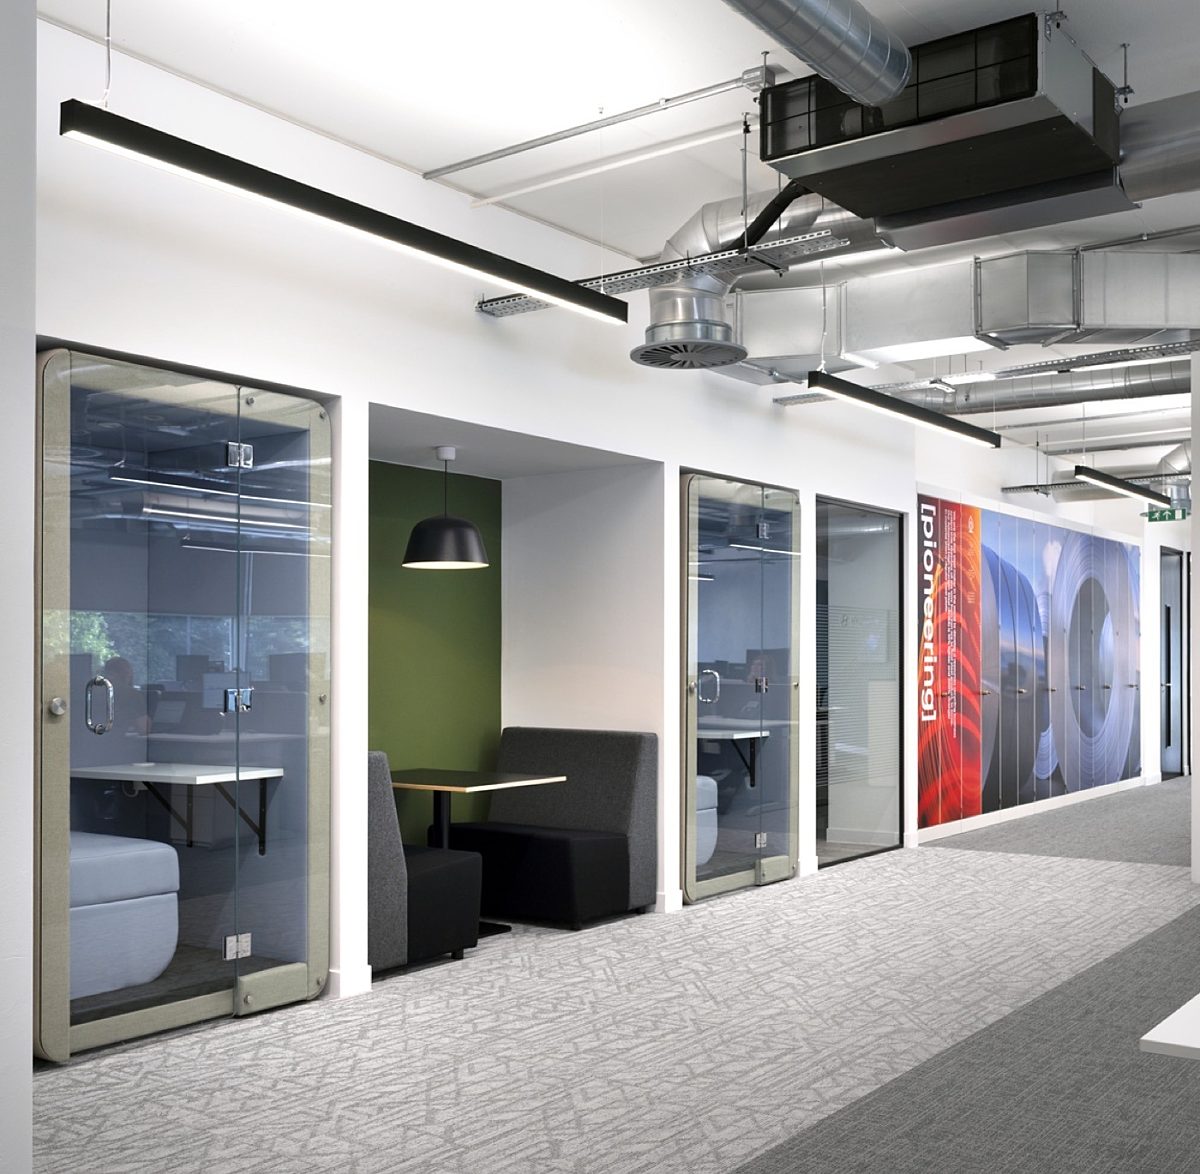 Hyundai office fit out exposed services